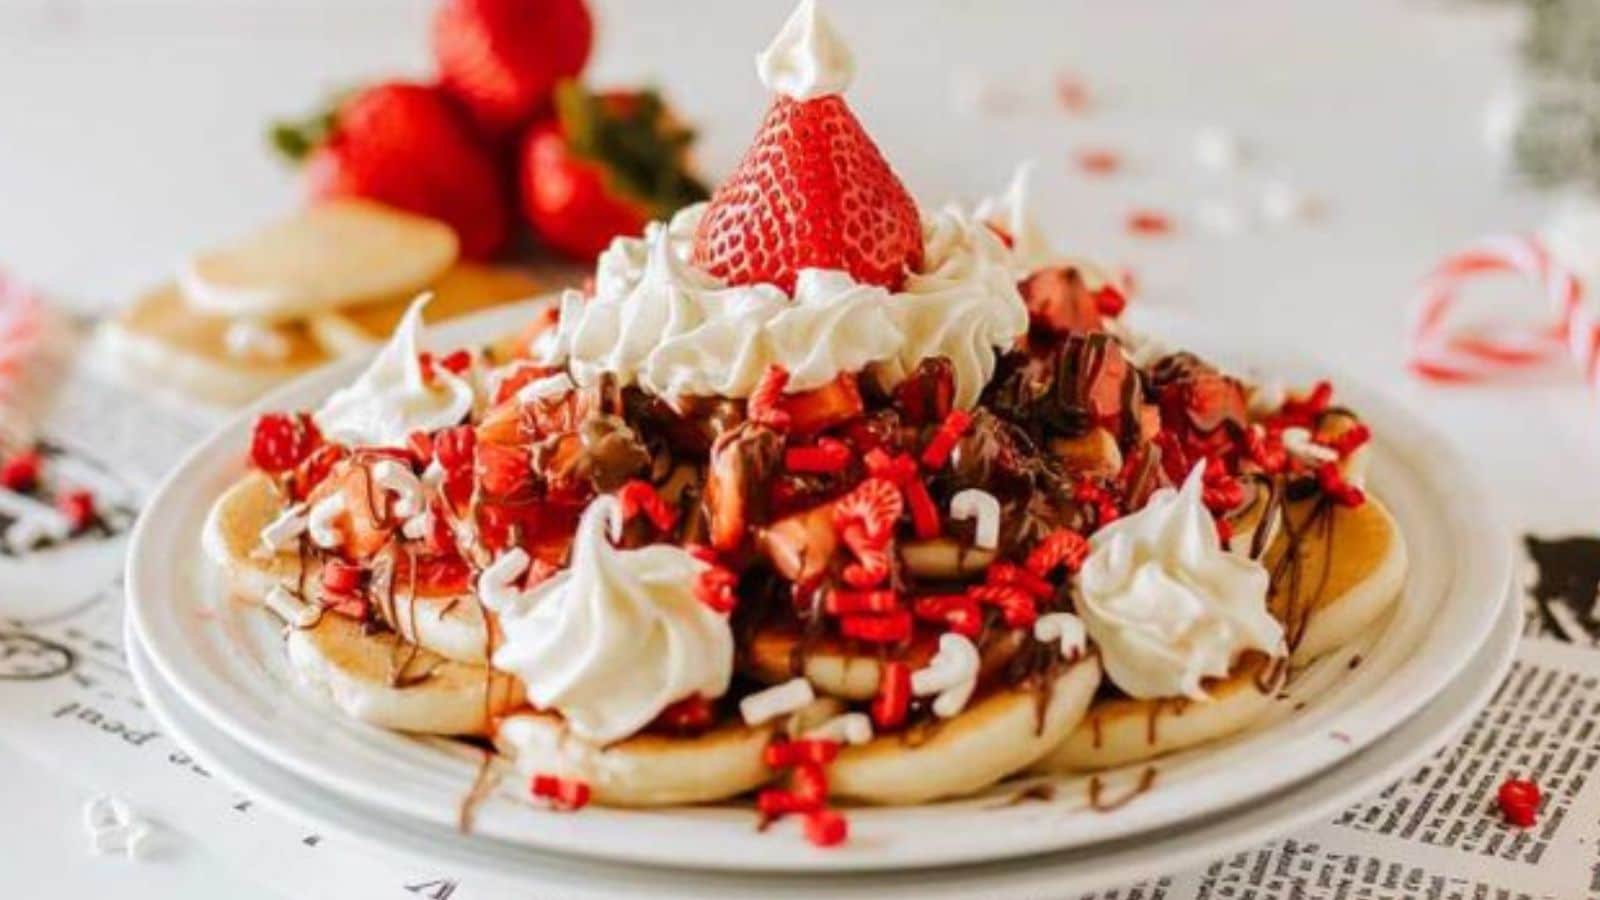 A plate with pancakes topped with whipped cream, strawberries, and sprinkles.